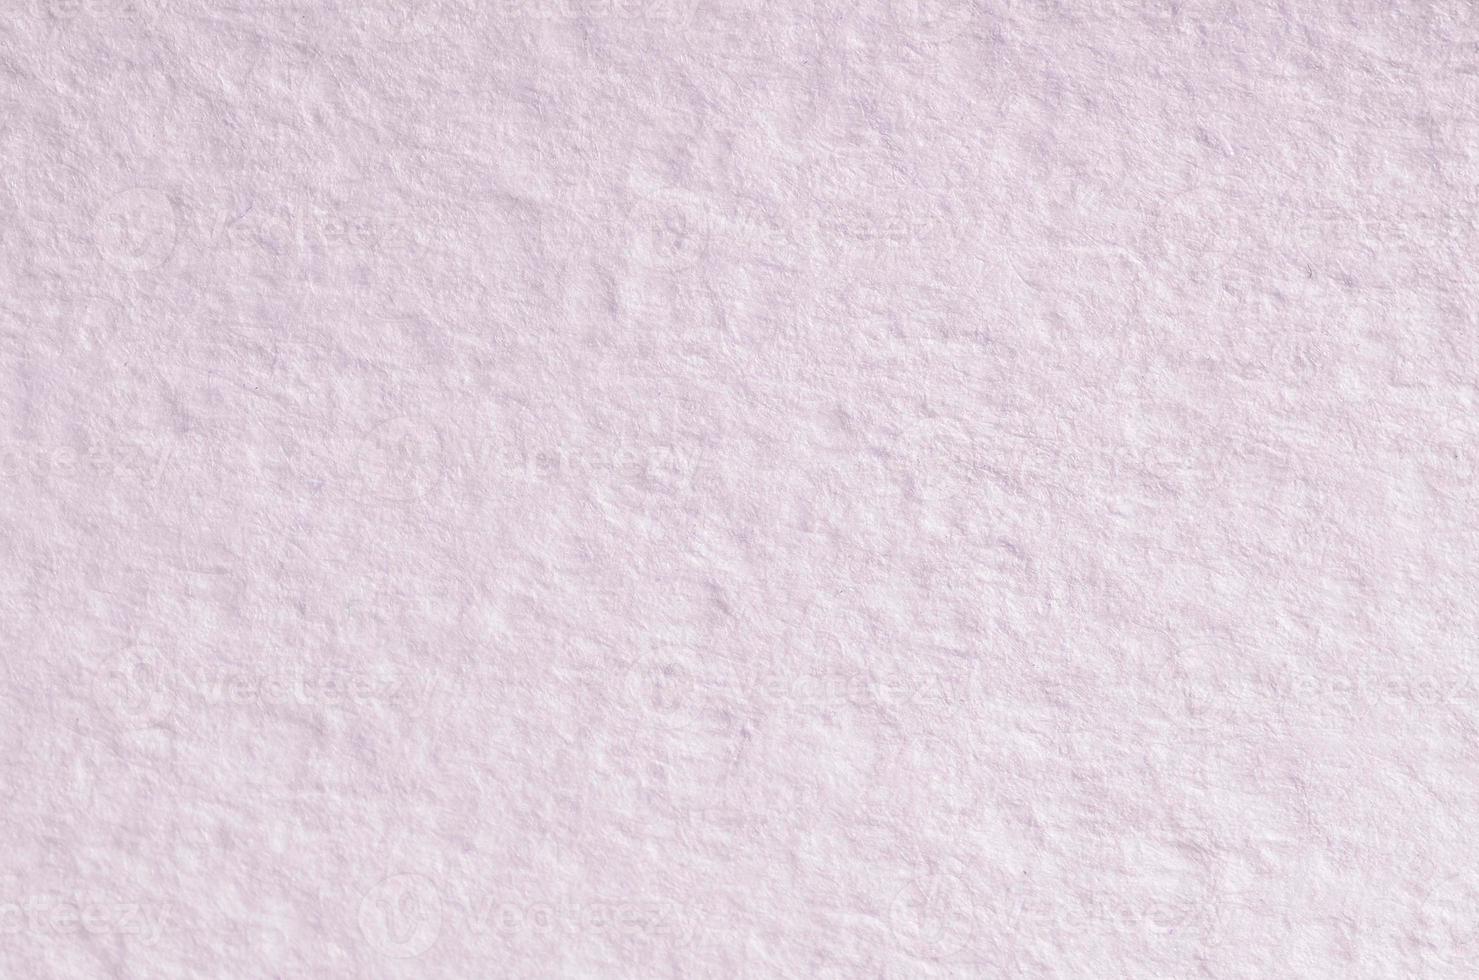 Texture of Thick Paper Intended for Watercolor Painting. Macro Snapshot of  Details of the Relief Paper Structure Stock Image - Image of material,  page: 117266085